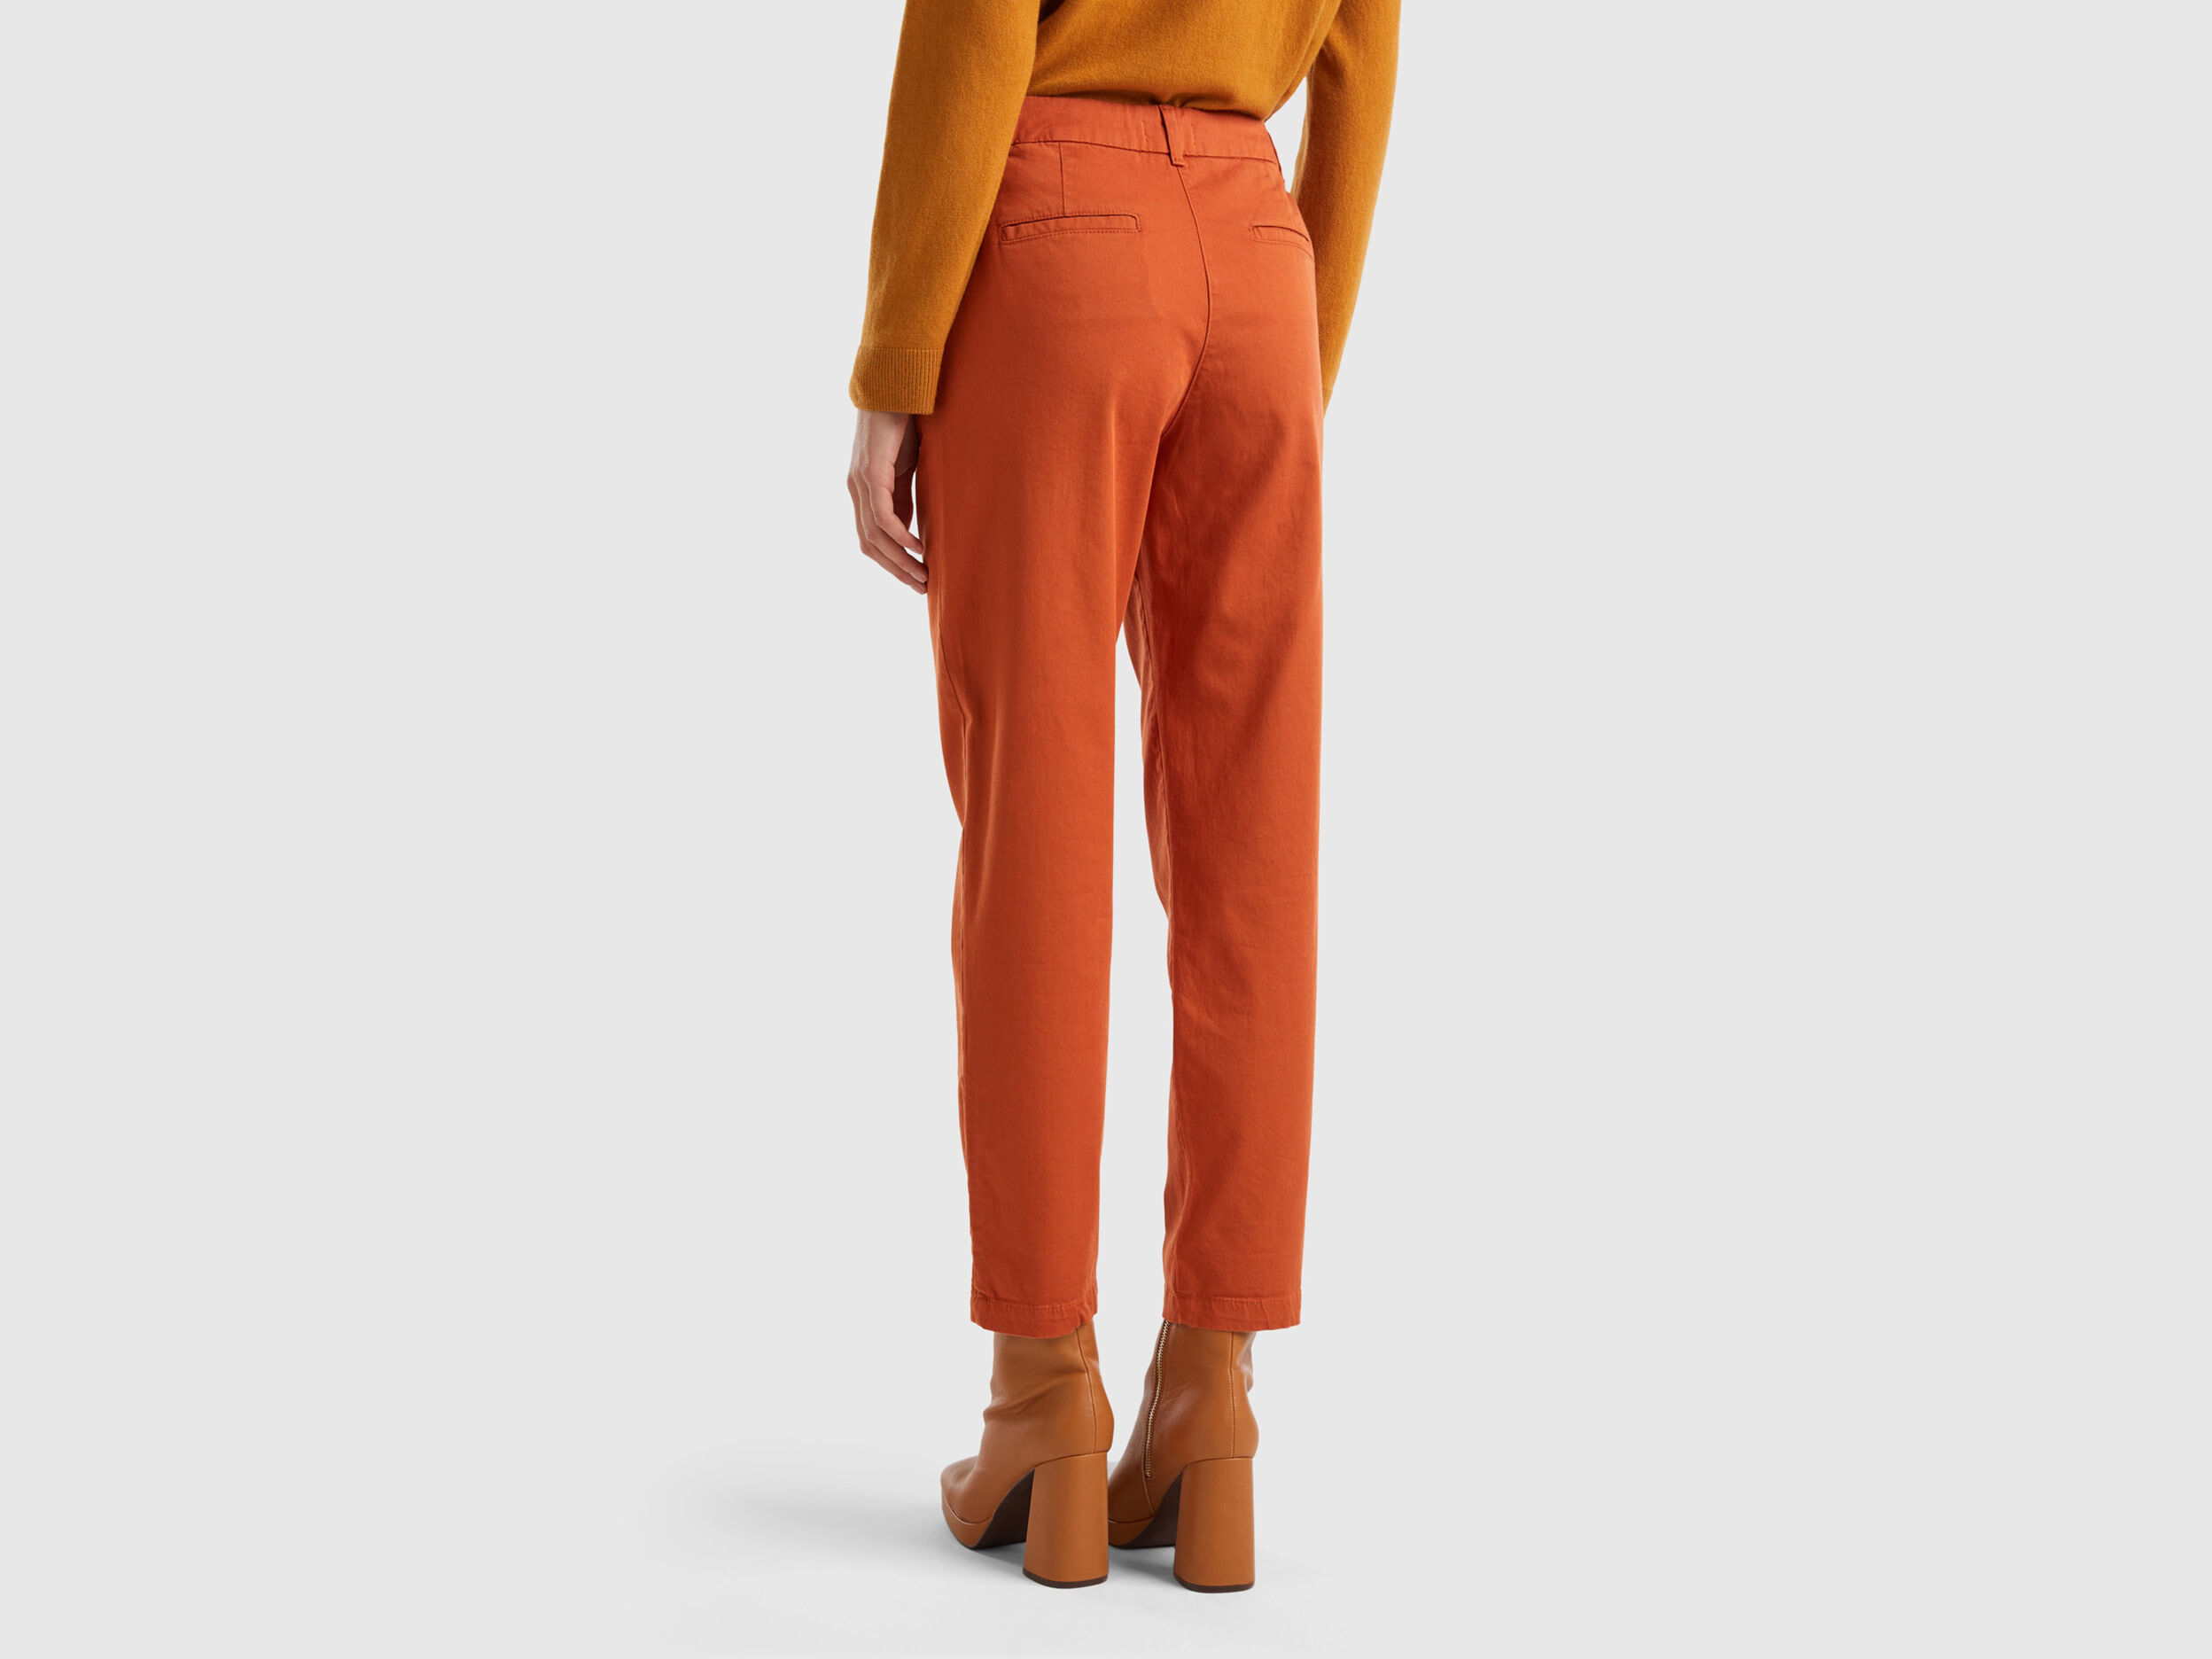 Buy Popwings Women Casual Orange Self Designed Formal Solid Trousers |  Latest Design Trousers | Stylish Trousers | Regular Wear Trousers Online at  Best Prices in India - JioMart.